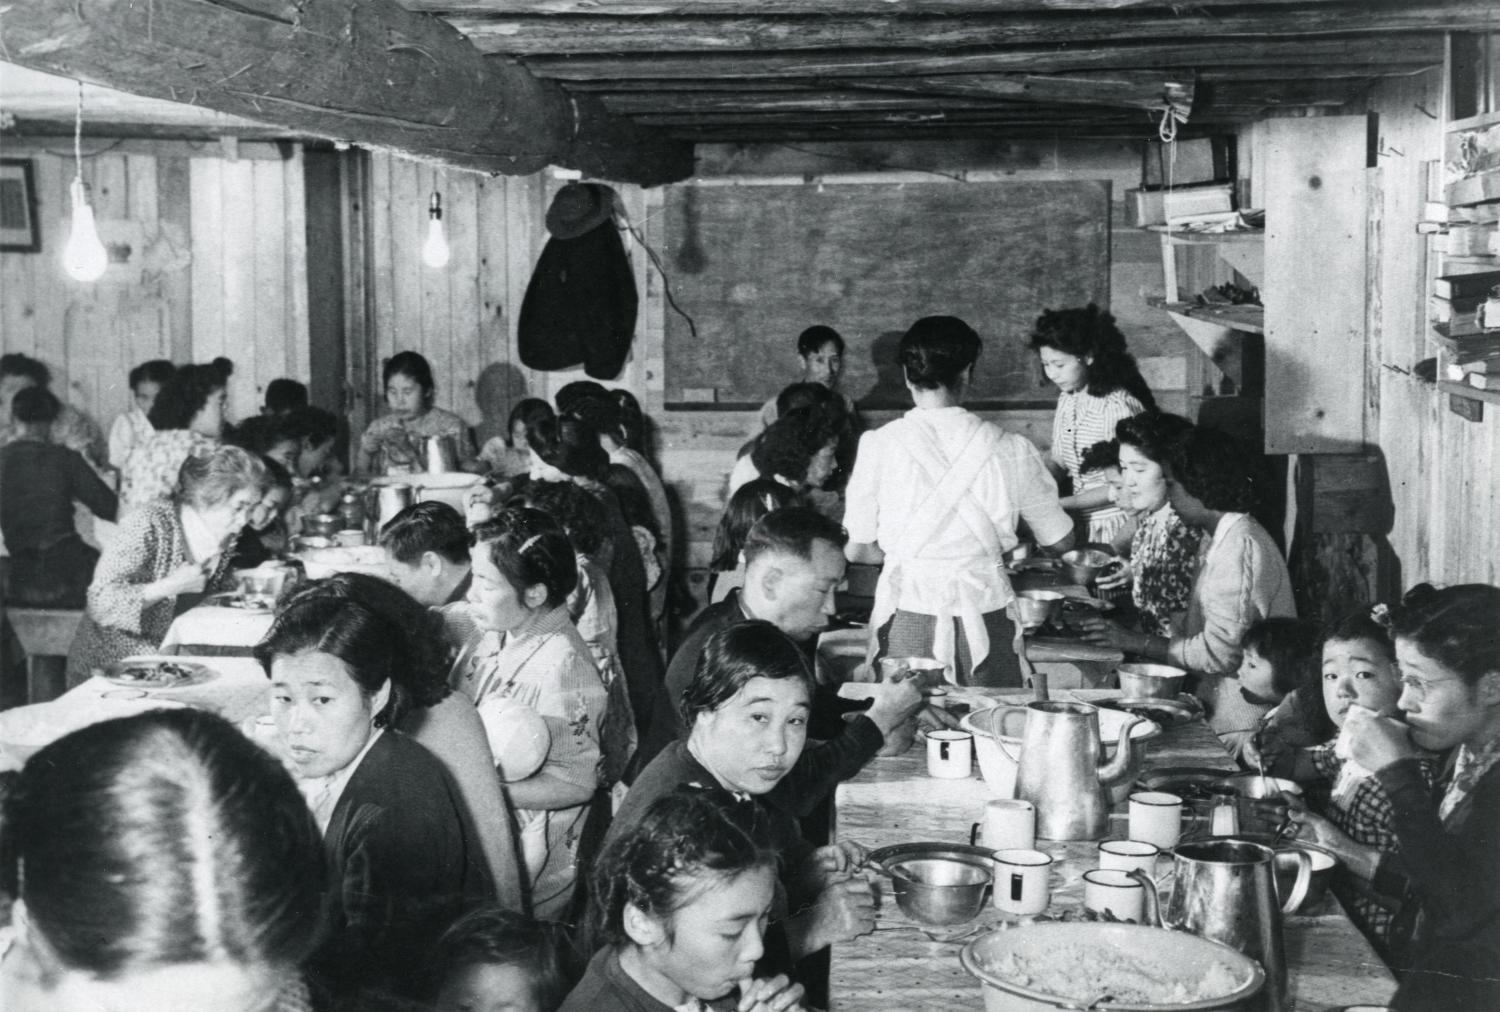 Group photograph in dining hall in Slocan Camp